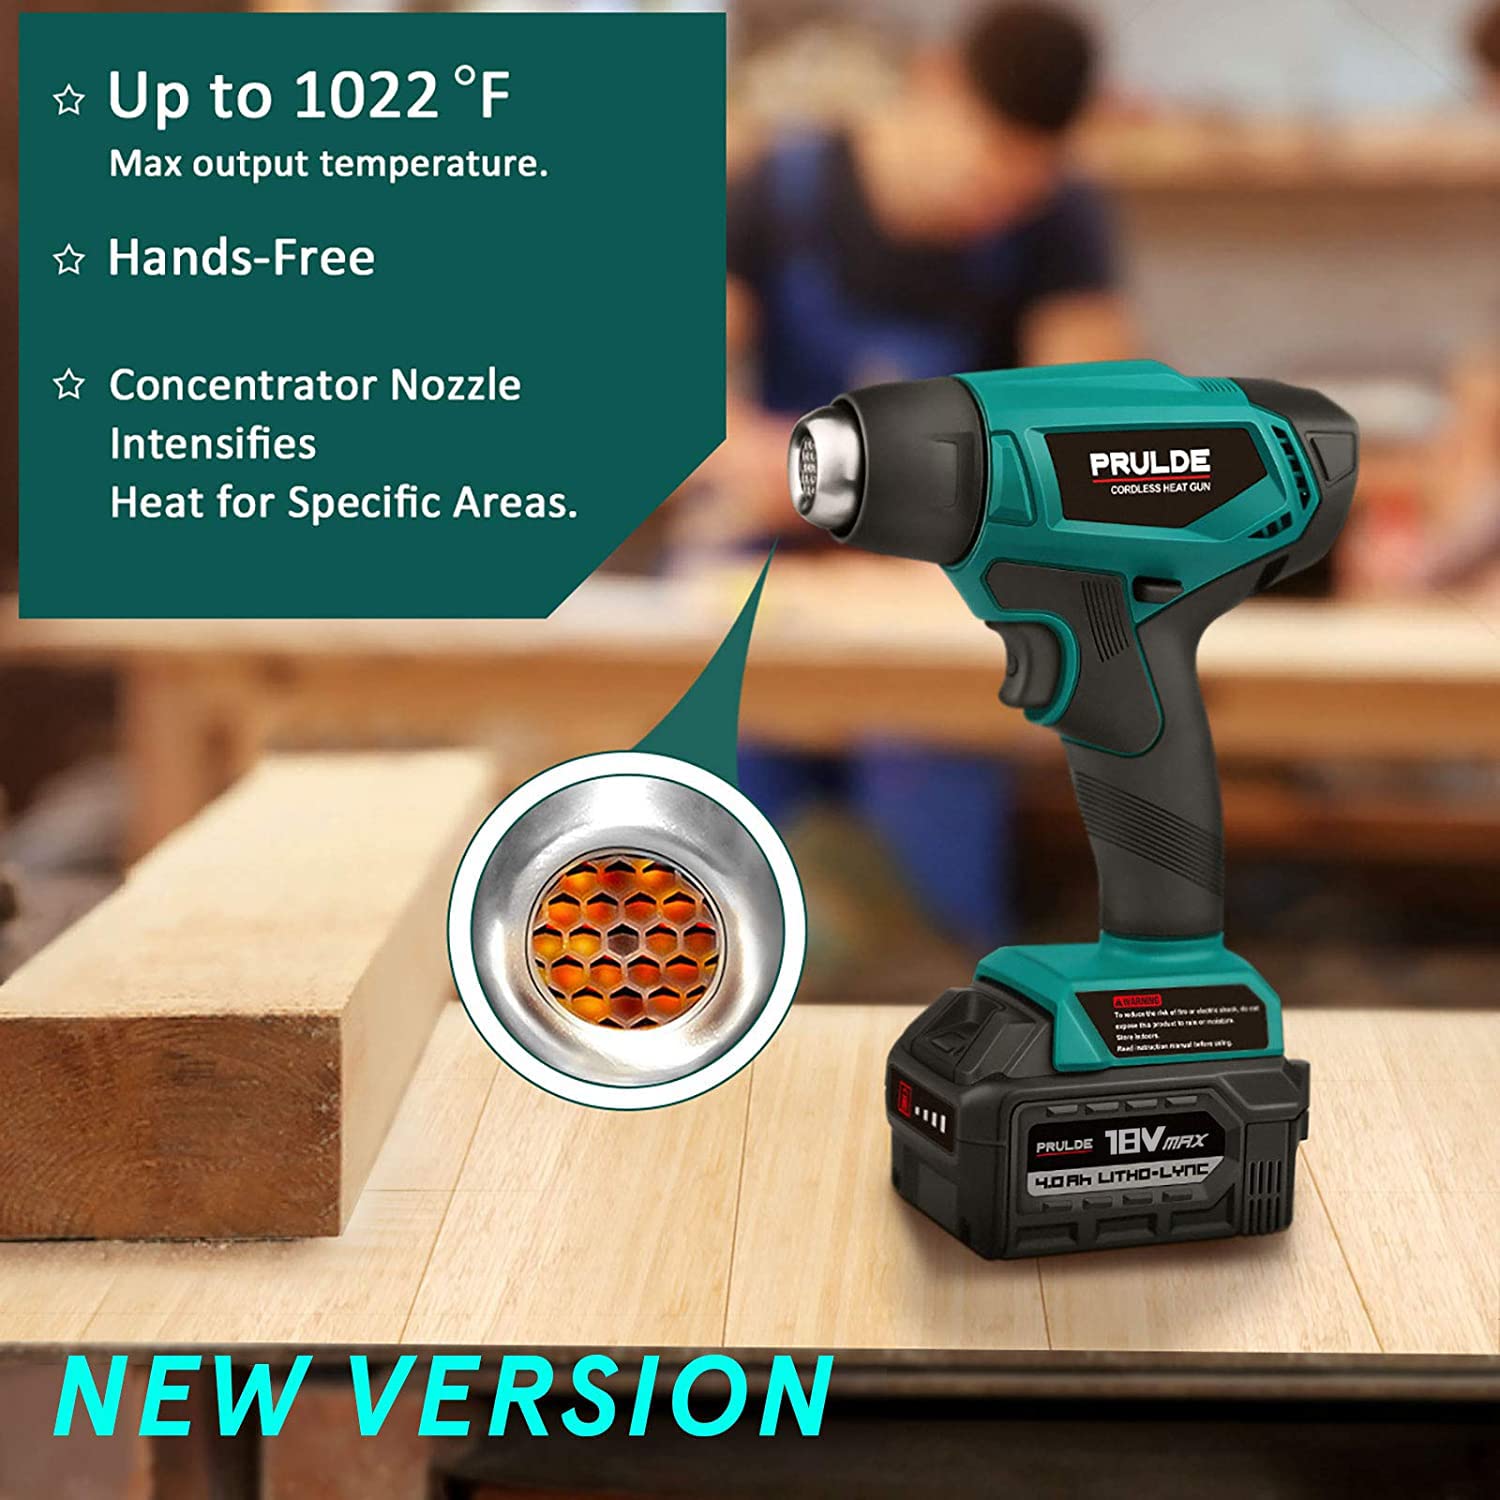 Mobile Heat 5 Cordless Heat Gun with 8.0 Ah Battery and Case by